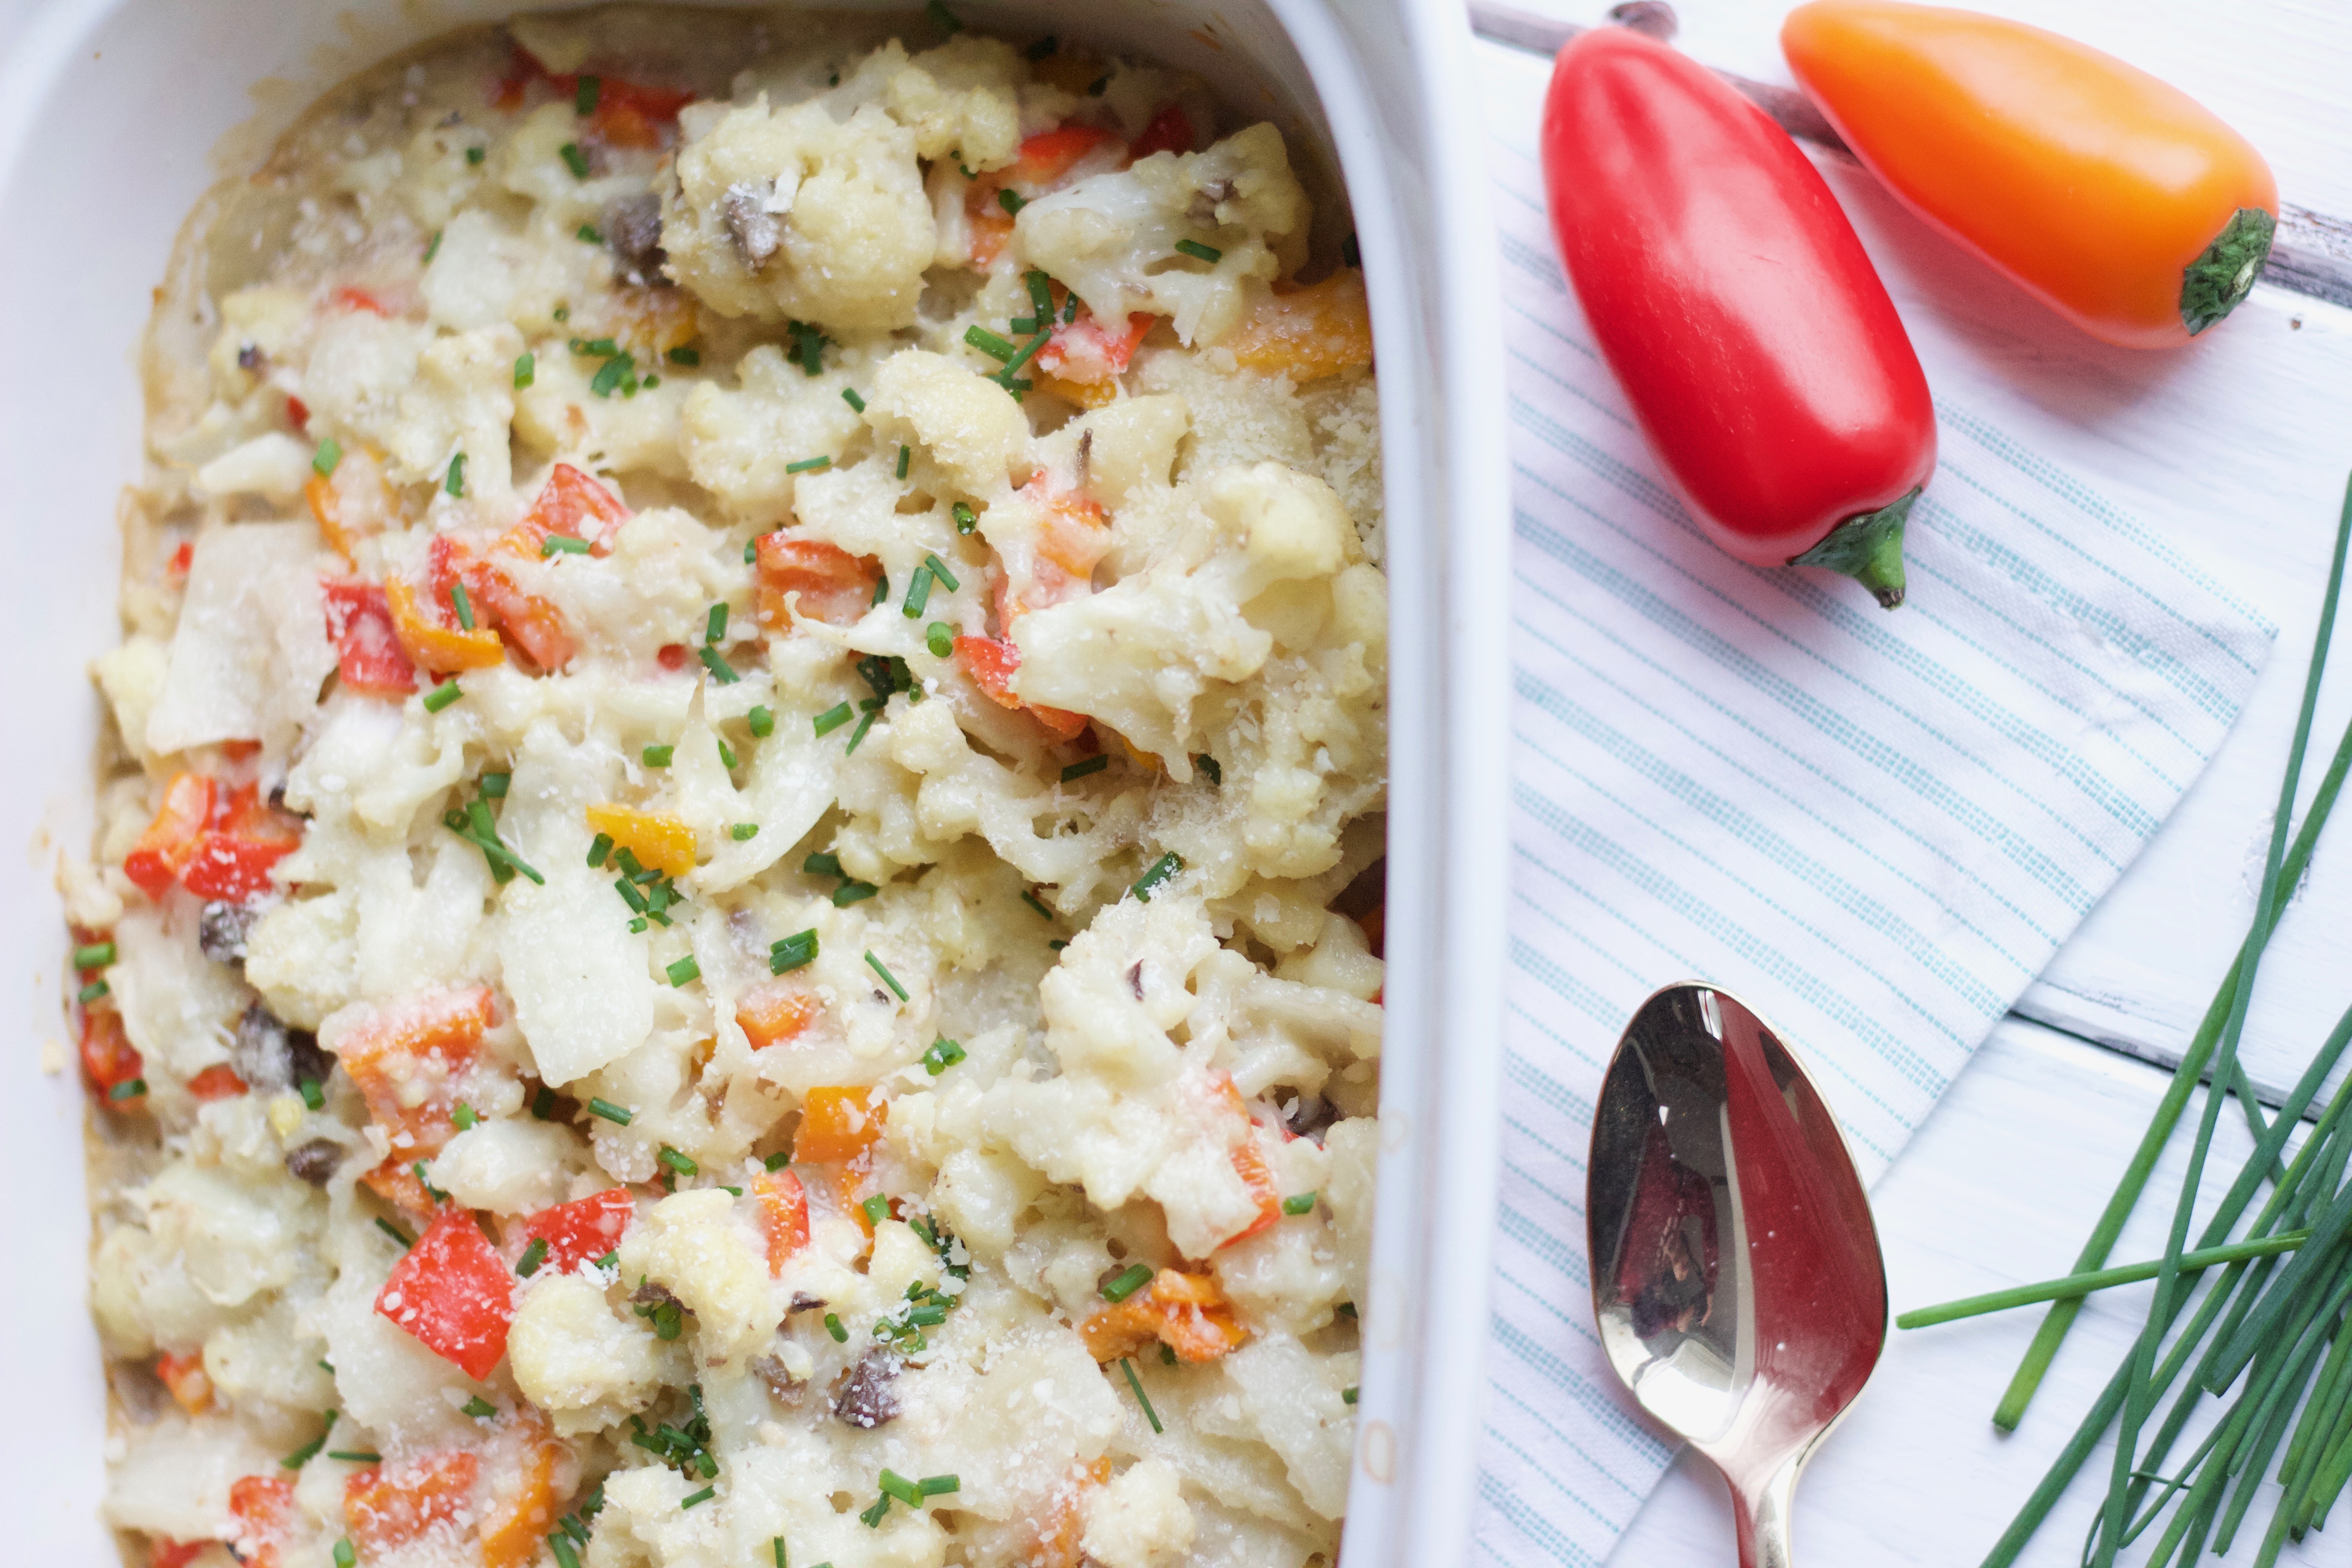 Creamy Cauliflower Bake with Tribelli Peppers a vegan and gluten free warm dinner dish that is bursting with pepper colours. Comfort food for any season! - www.nikkisplate.com